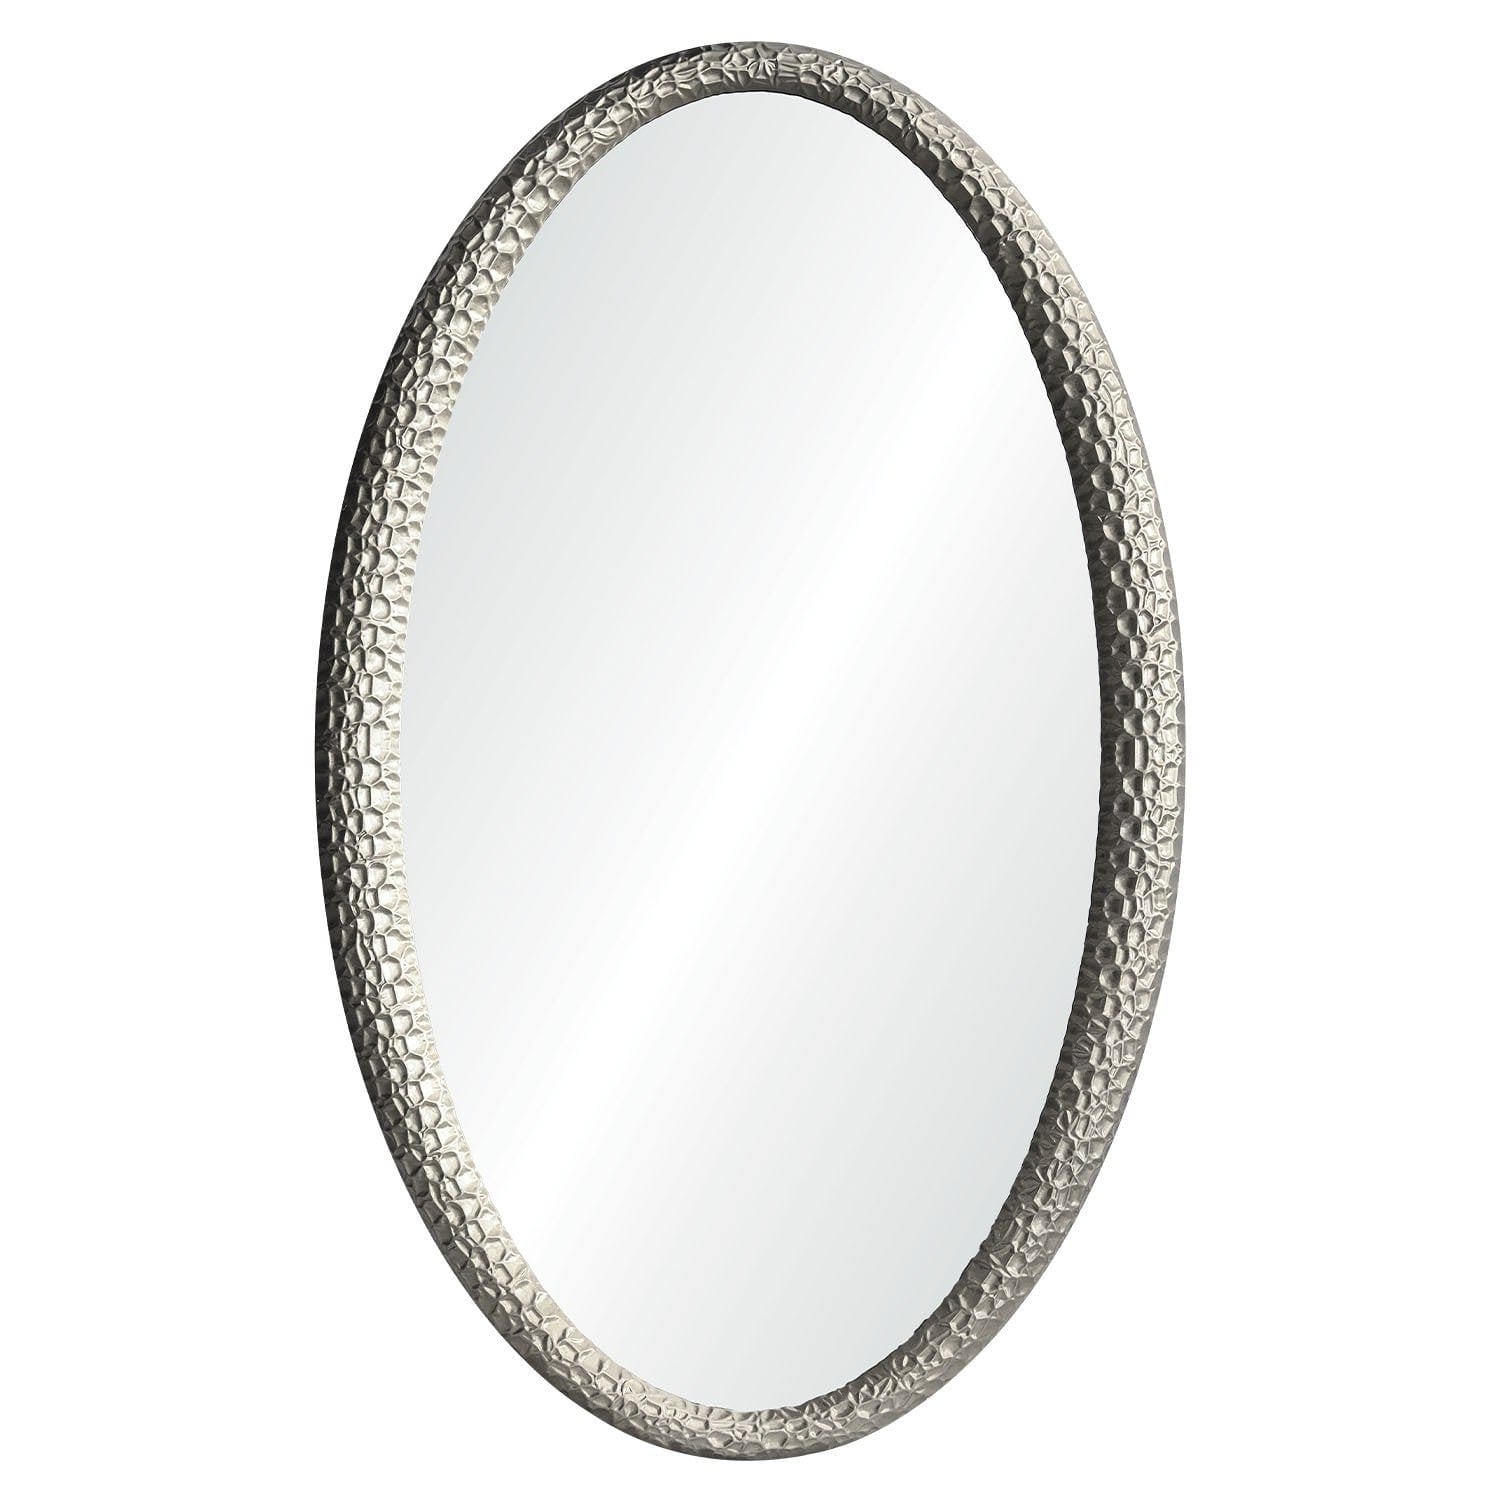 Mirror Image Home - Martele Silver Oval Mirror by Jamie Drake | Fig Linens